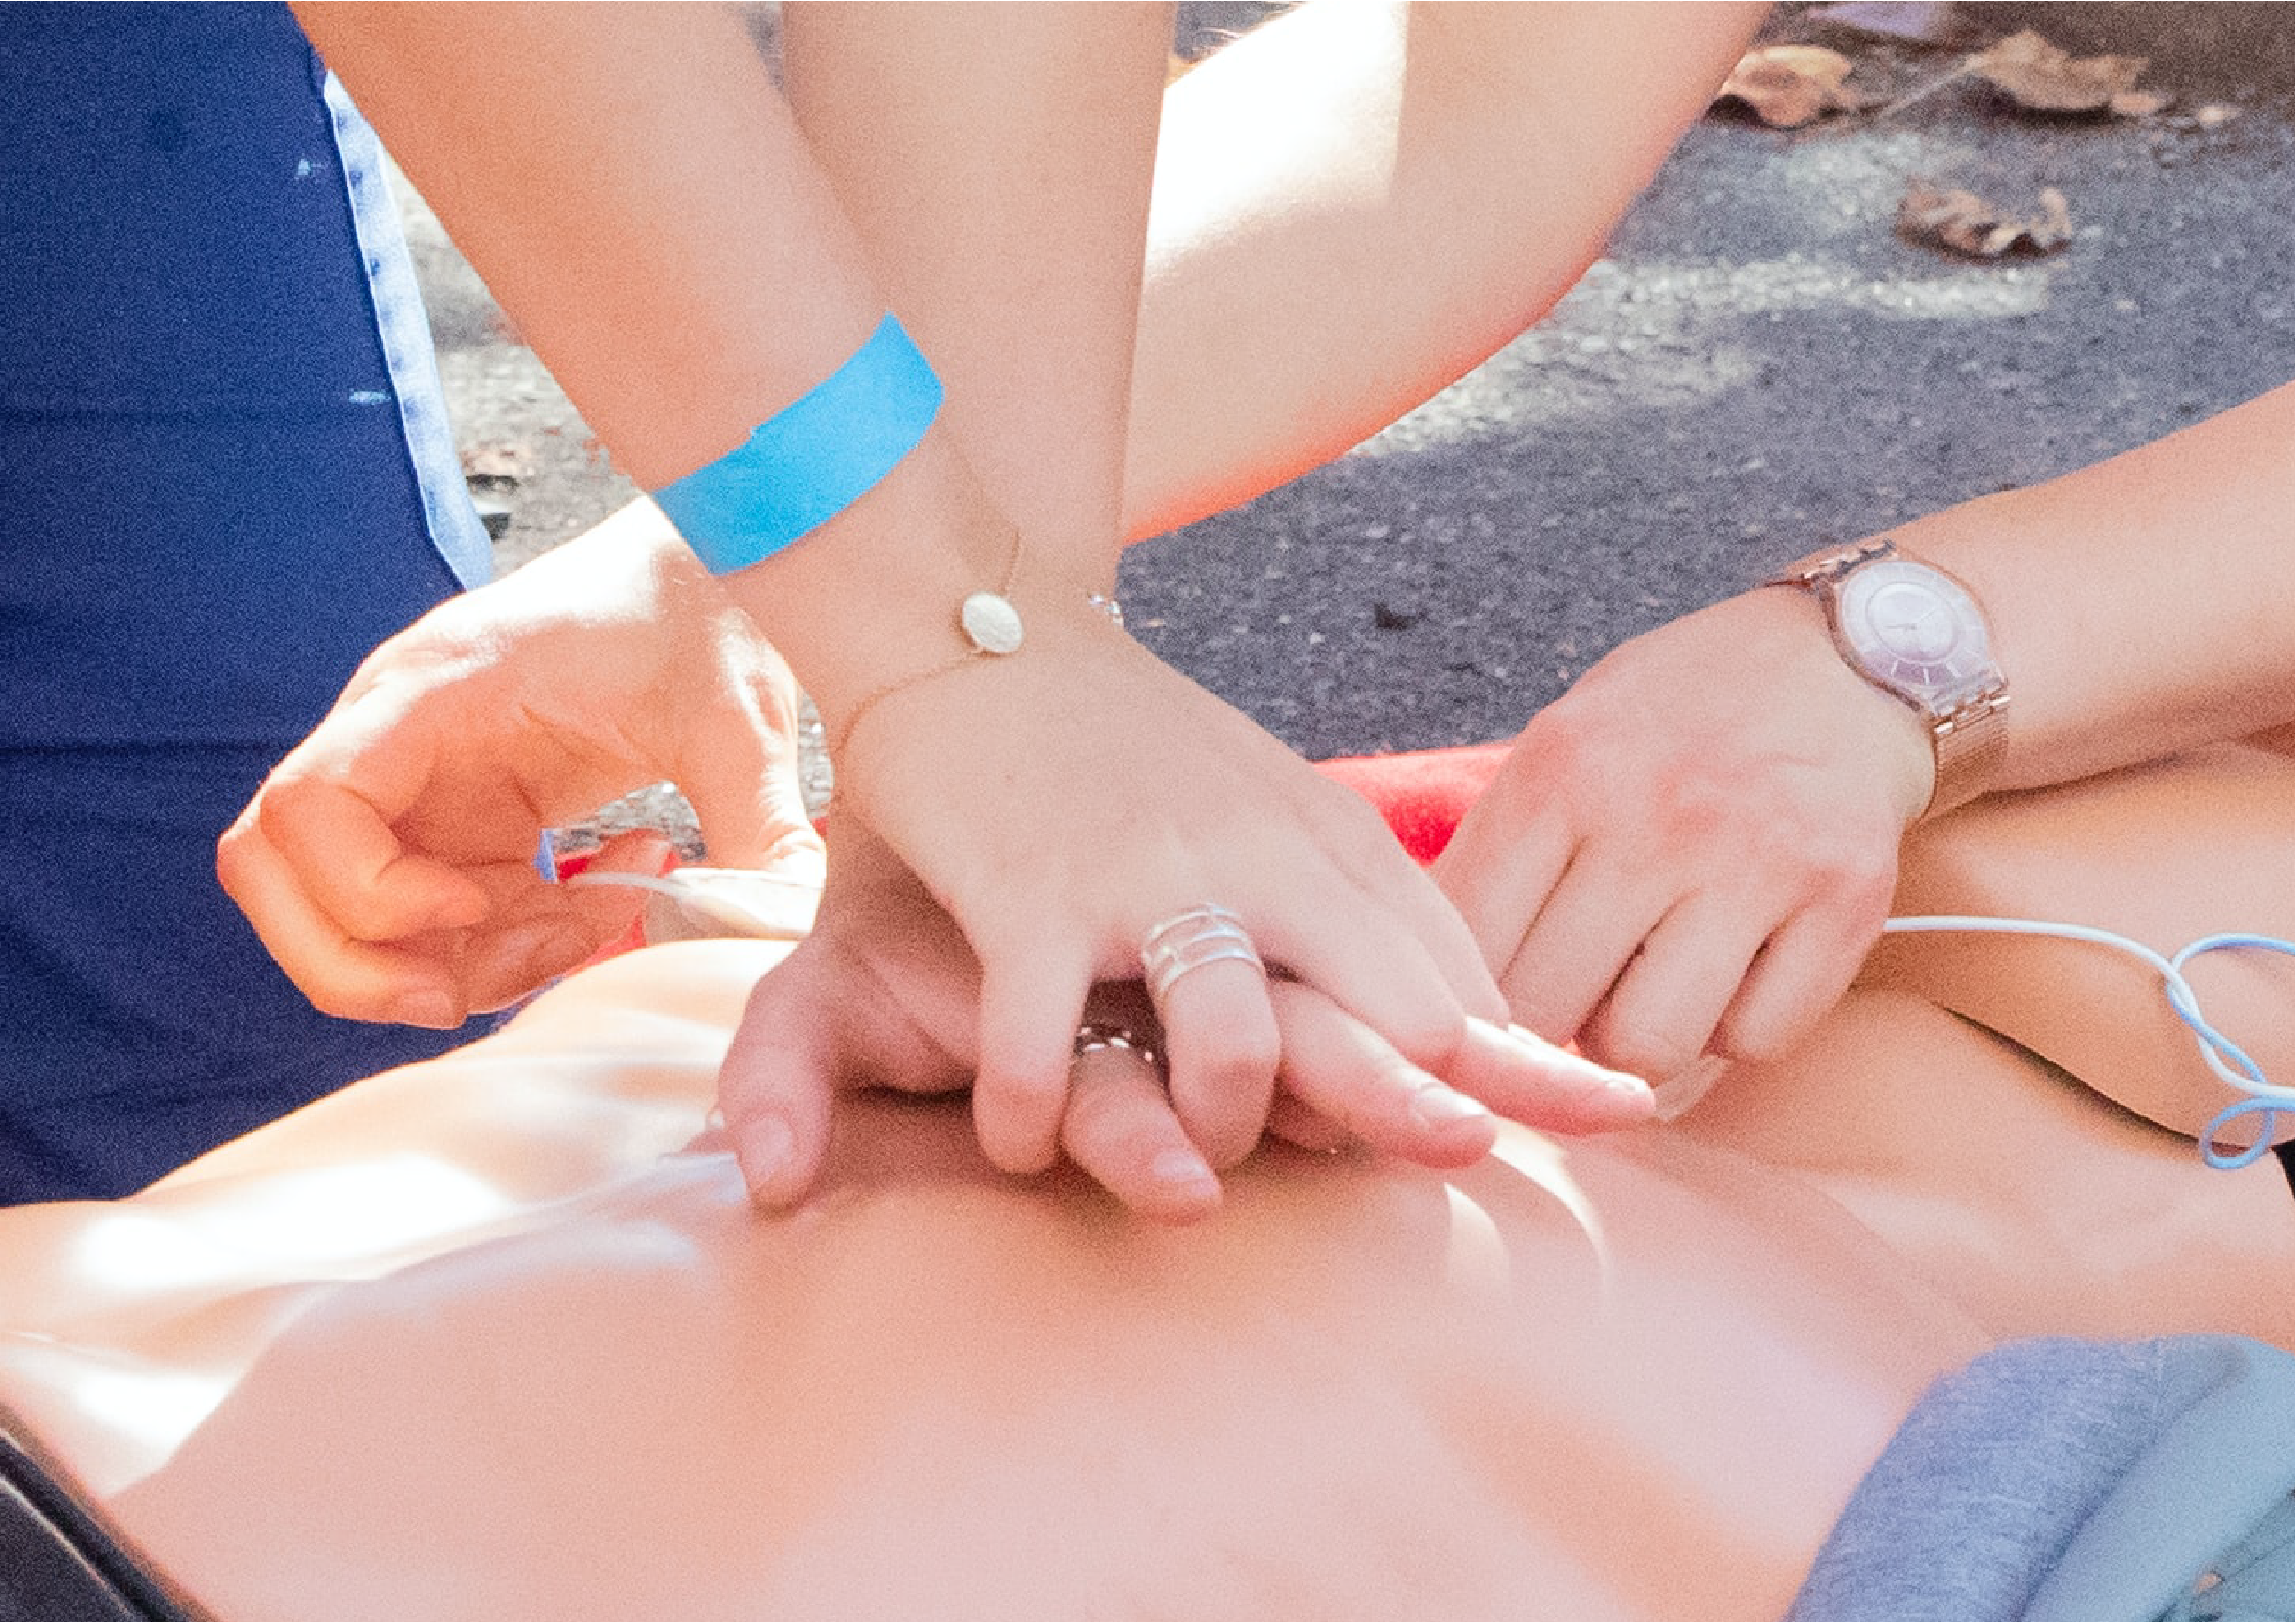 Close up of hands performing first aid and CPR on an individual lying on the ground